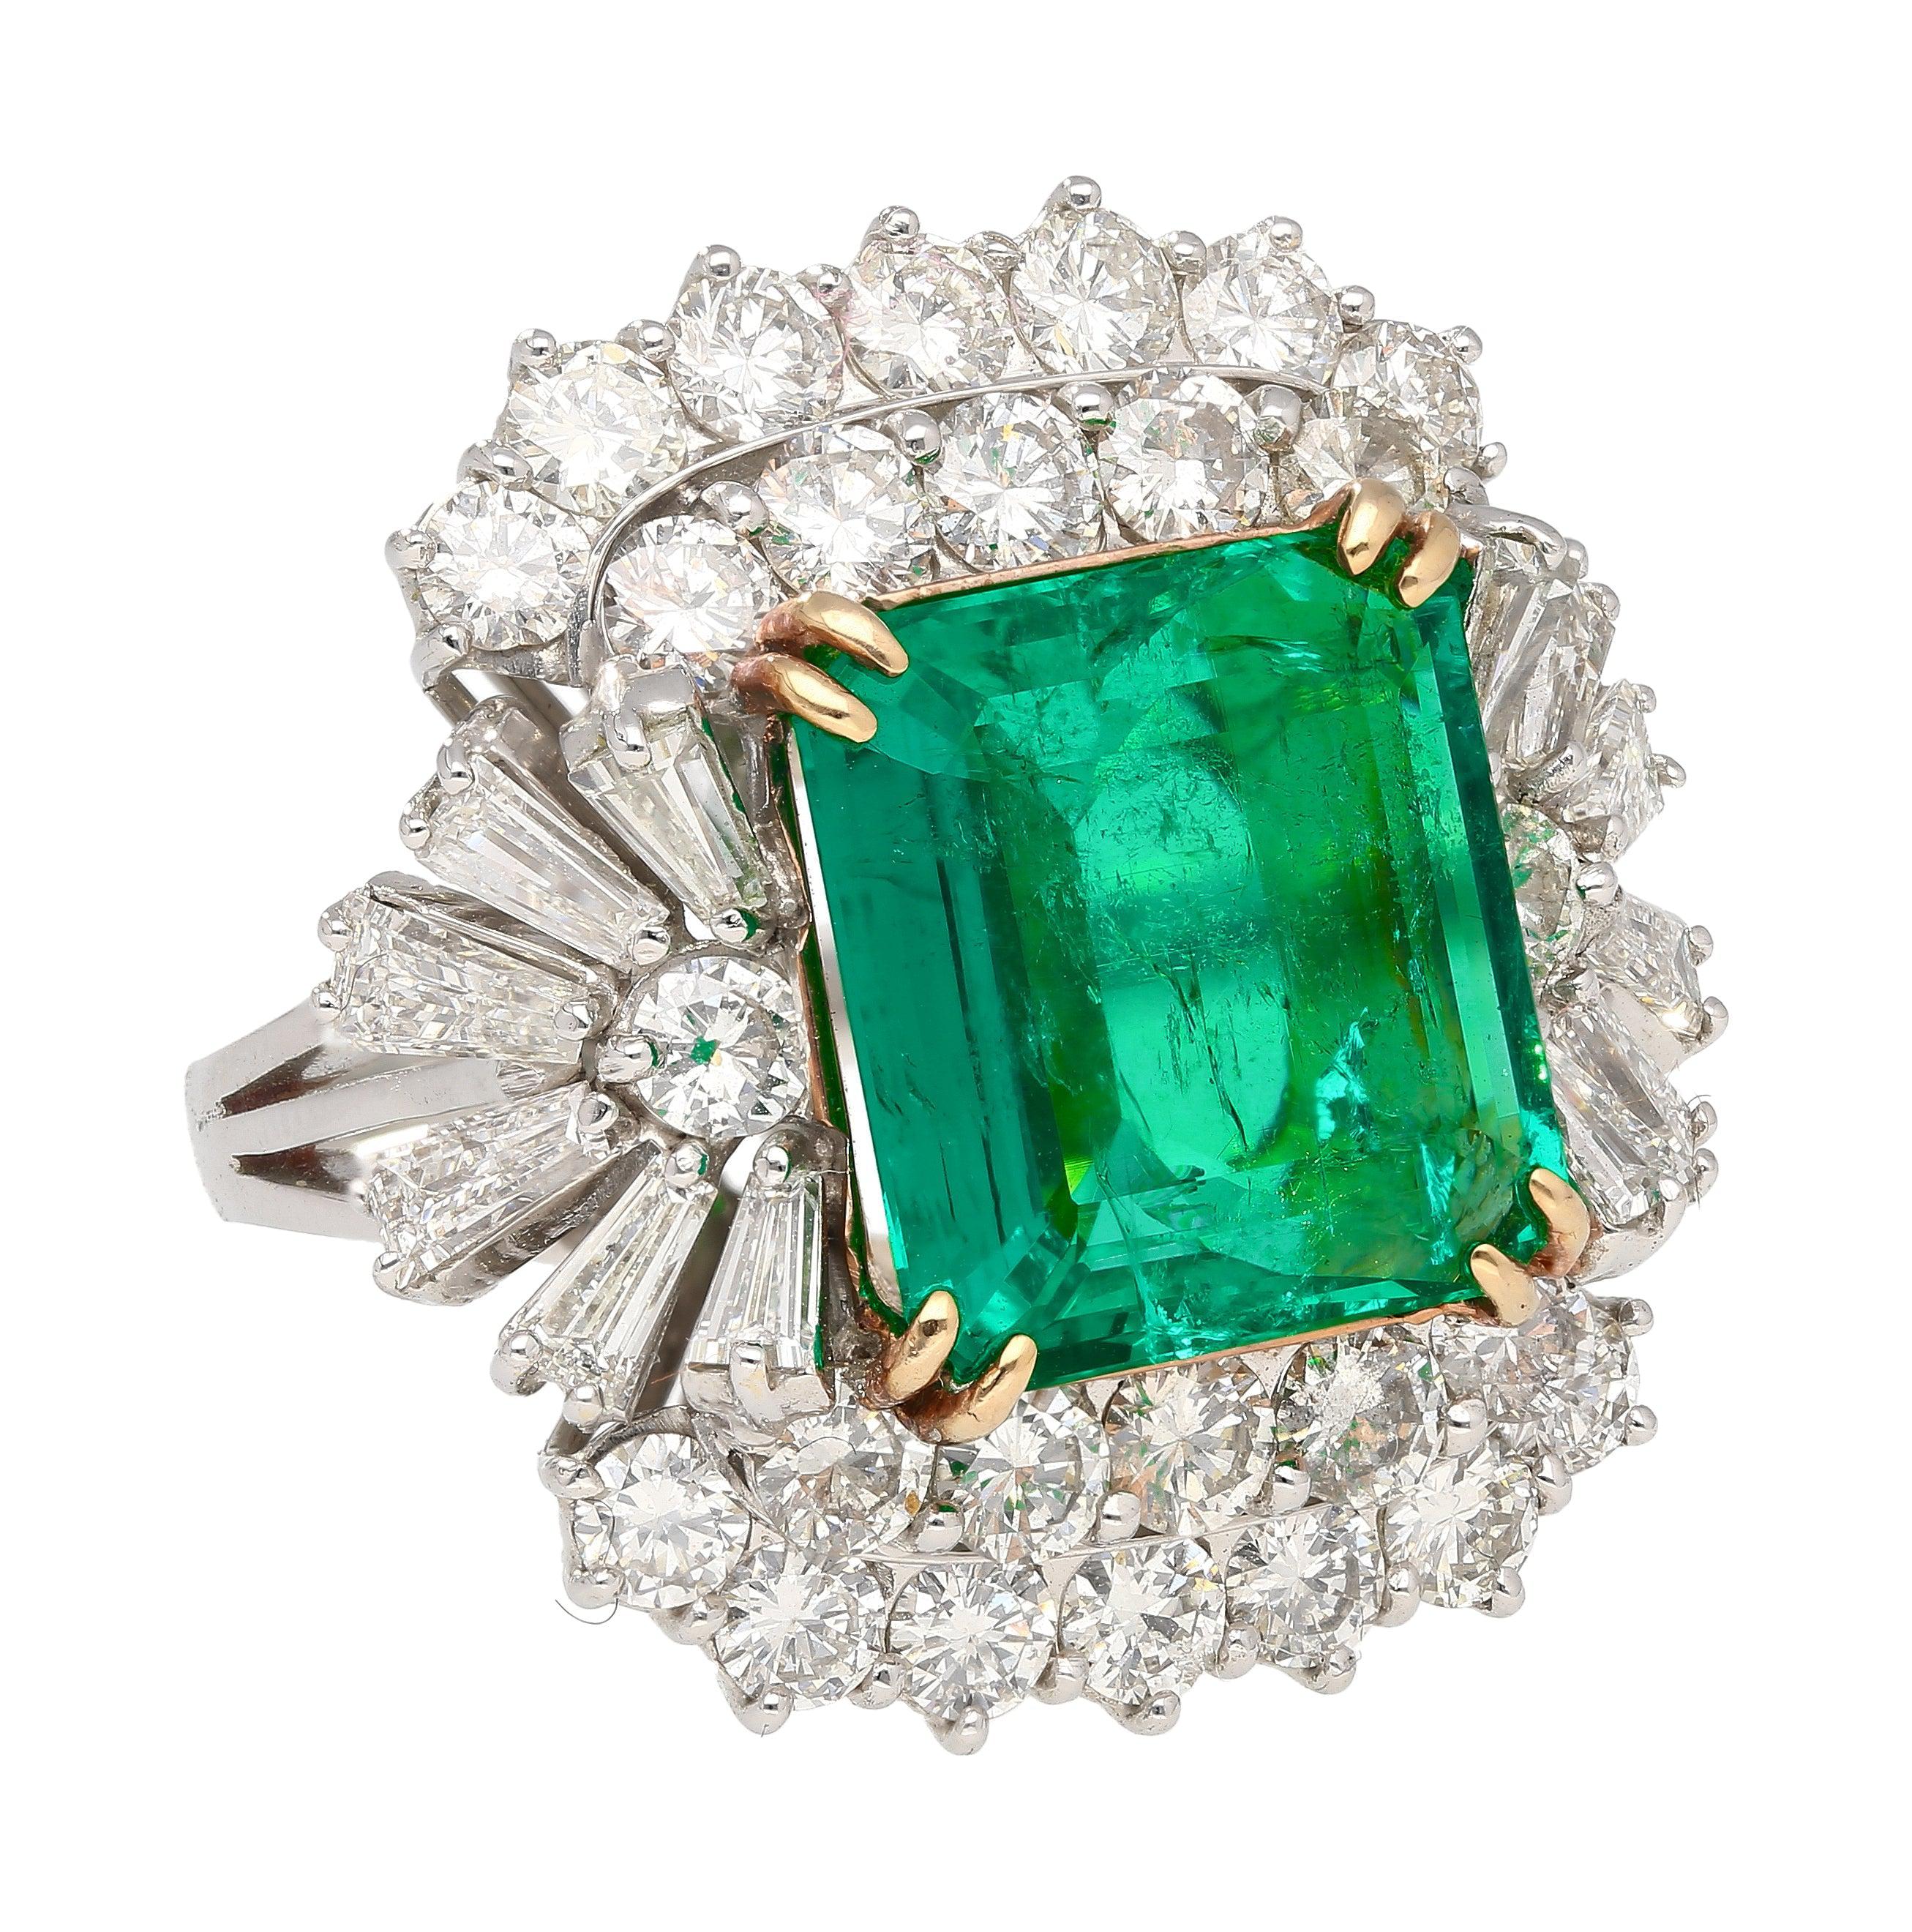 6_26-Carat-Emerald-Cut-Emerald-with-Trillion-and-Round-Cut-Diamond-Side-Stone-Ring-in-18K-White-Yellow-Gold-Rings-2.jpg